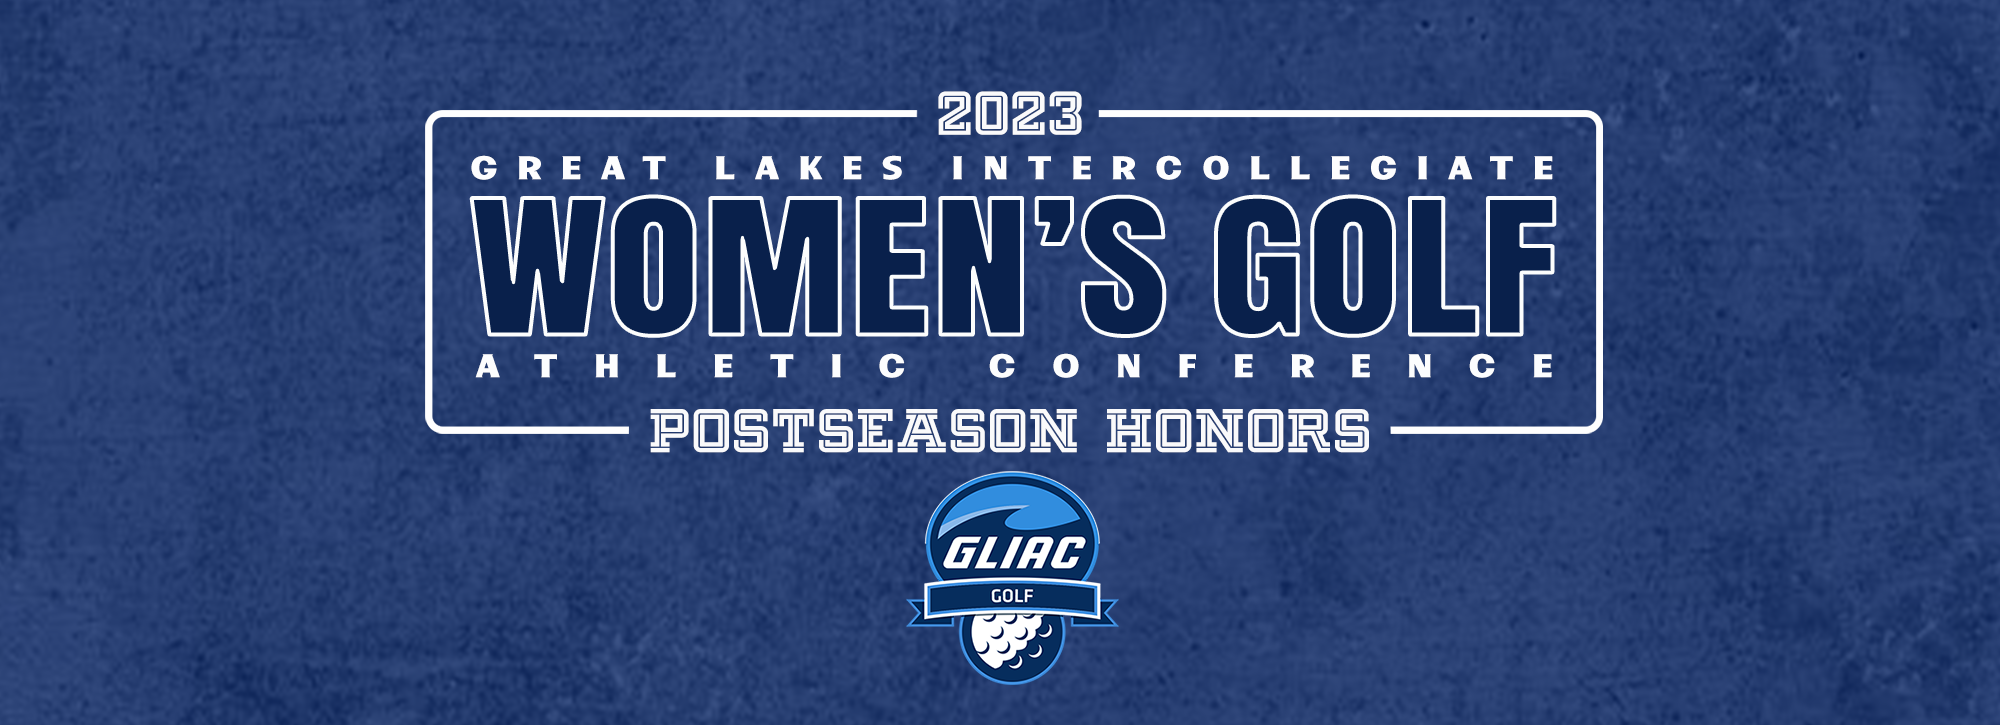 GVSU's Stoll earns GLIAC Women's Golf Player of the Year honors; all-conference teams announced